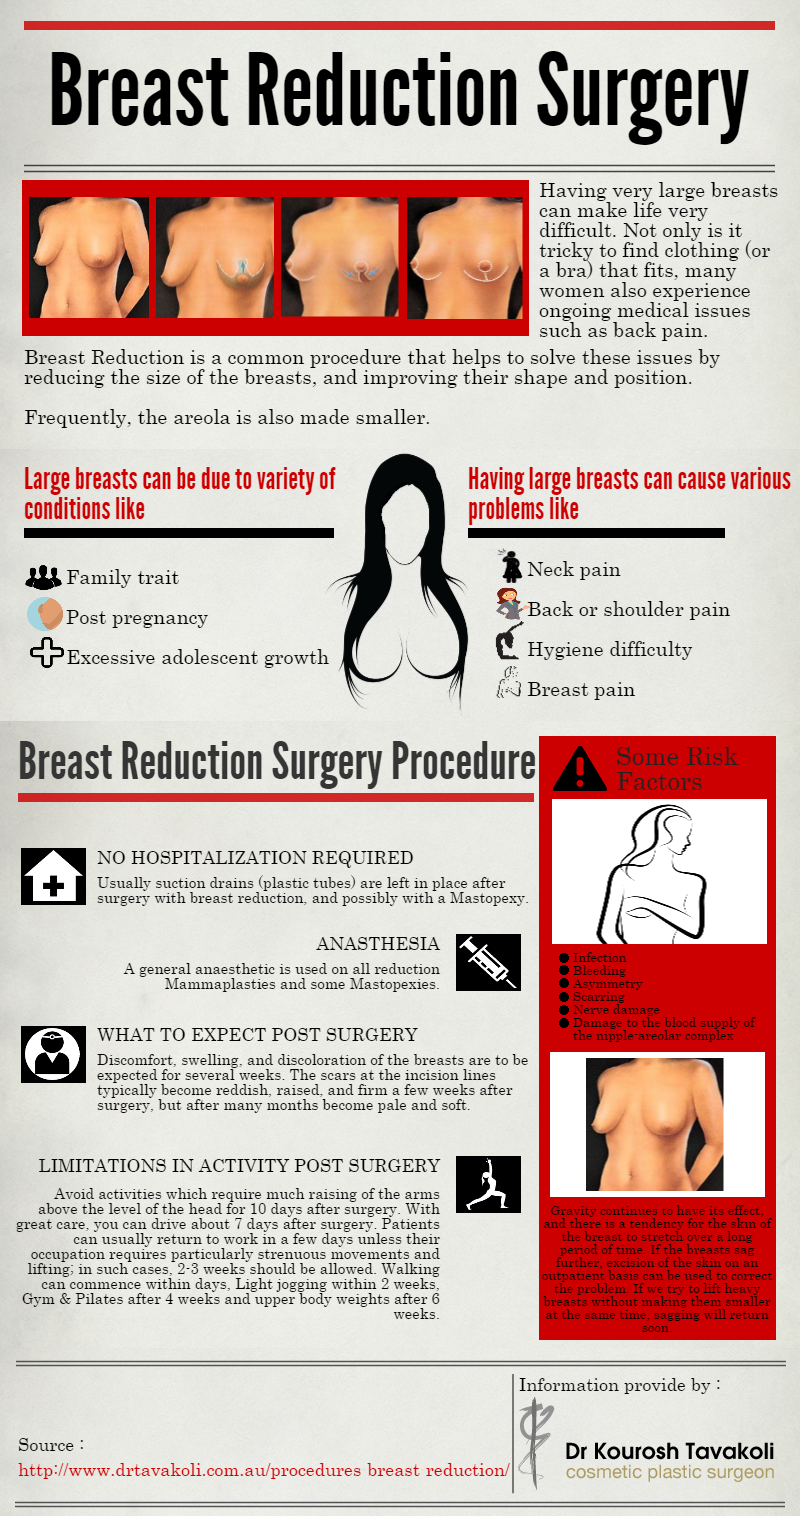 Negative effects of LARGE BREASTS